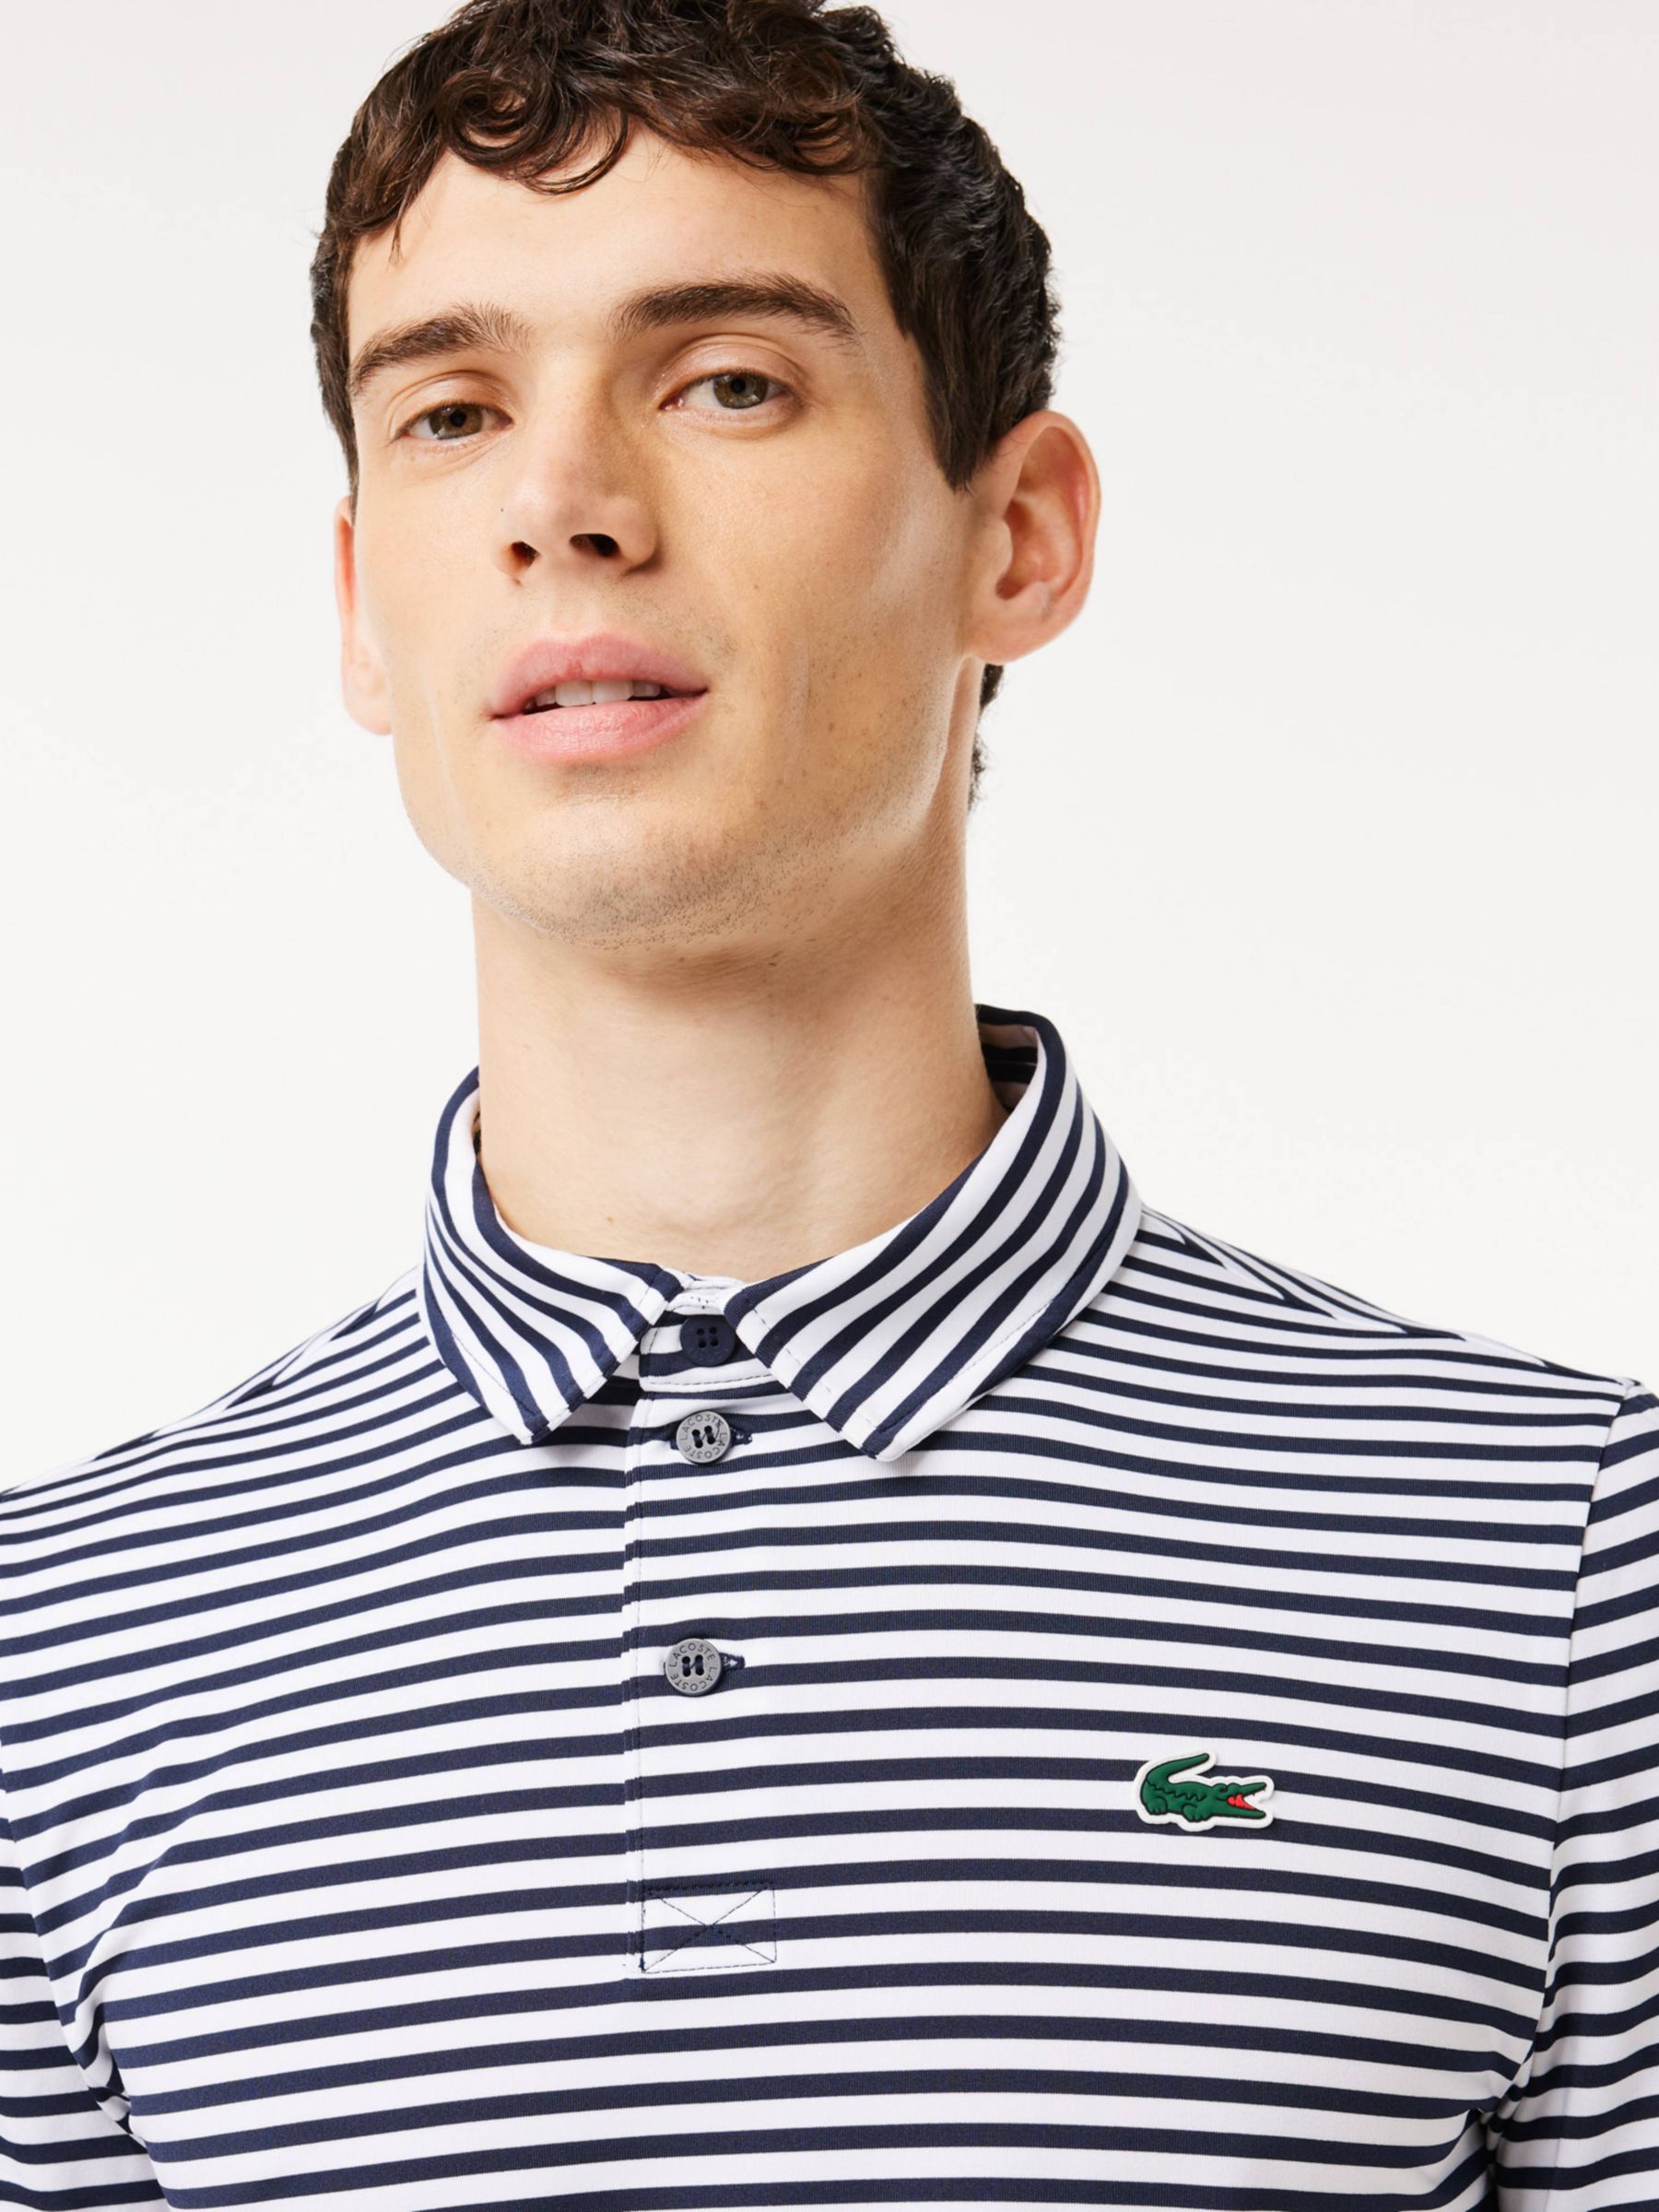 Lacoste Golf Essential Polo Shirt, Blue/White, S